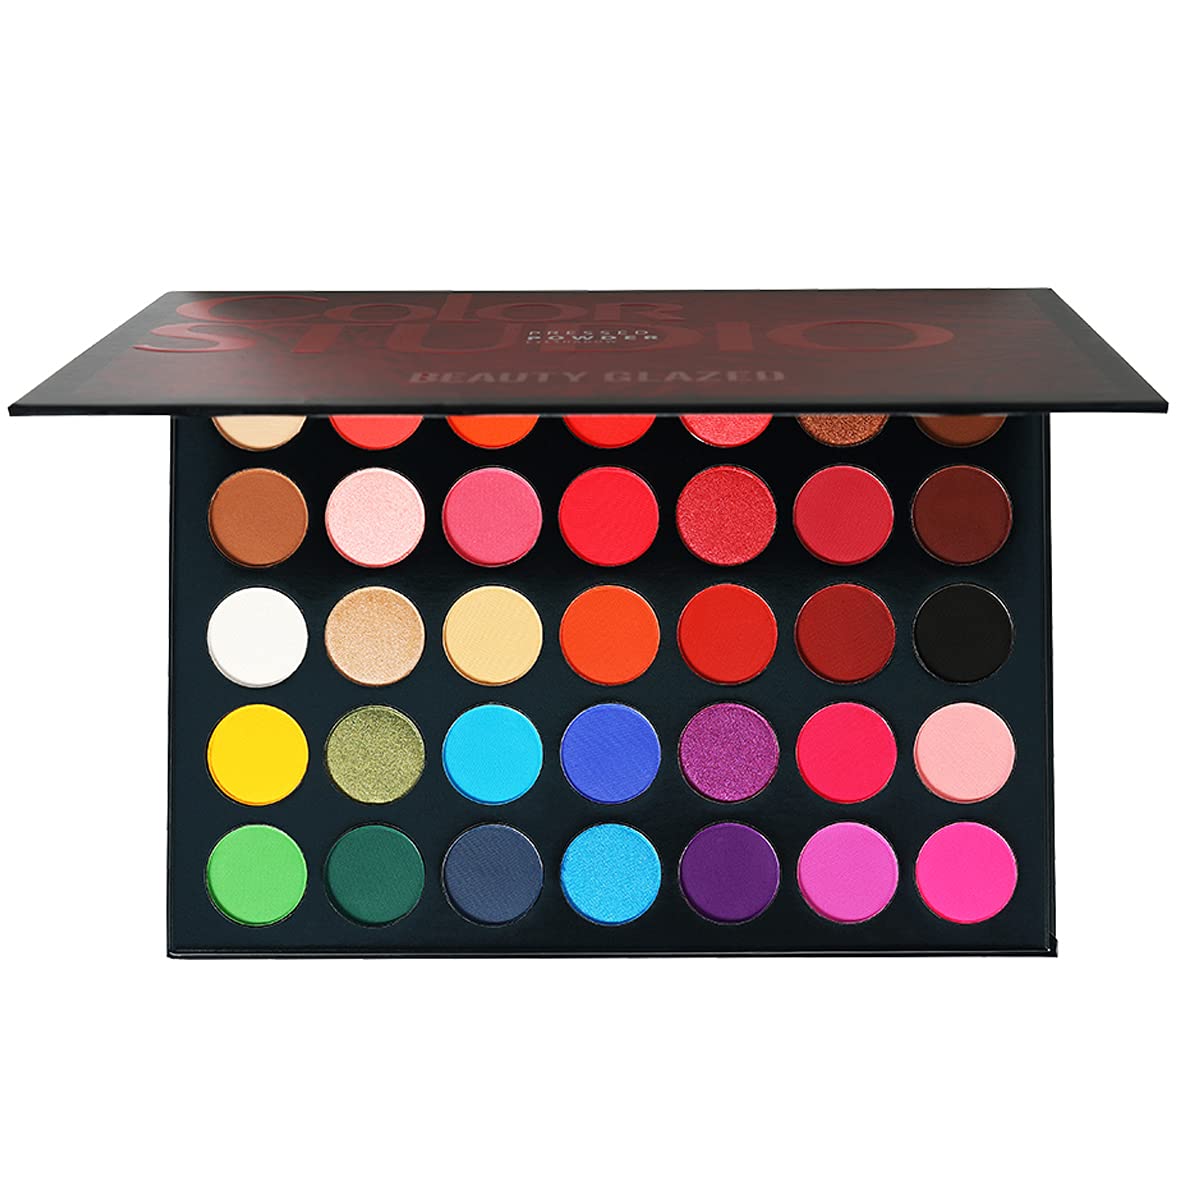 35 Color Studio Eye Shadow Palette Makeup Palette, Perfectly combinable color shades, Matt, Luminous and shimmering textures, For seductive eyes